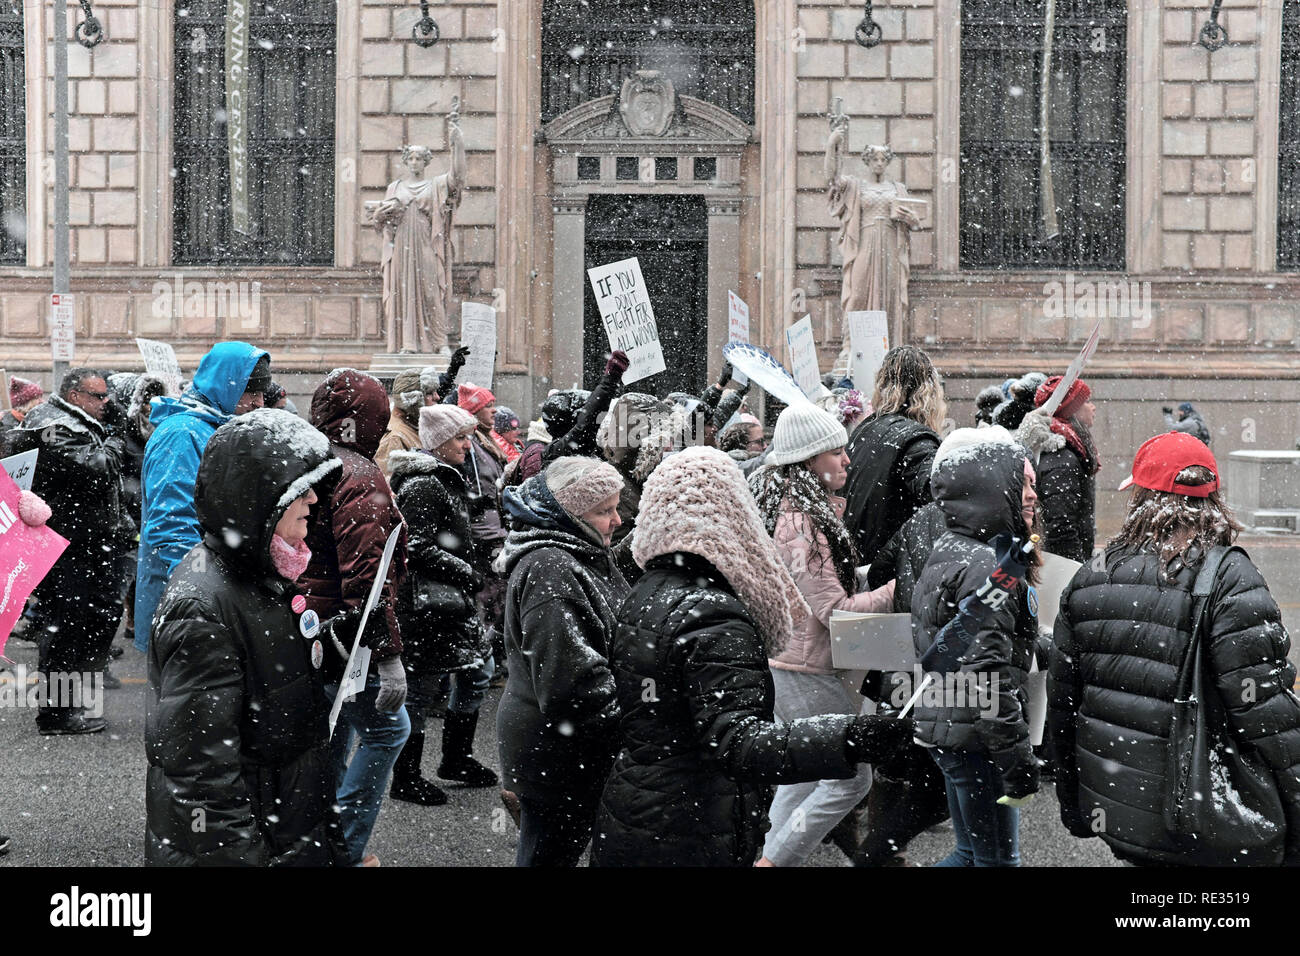 Cleveland, Ohio, USA, 19th January, 2019.  Winter Storm Harper engulfs participants in the 2019 Women's March in downtown Cleveland, Ohio, USA.  The strongest winter storm of the season was felt as marchers passed the Federal Reserve of Cleveland Ohio building on East 6th Street.  Credit: Mark Kanning/Alamy Live News. Stock Photo